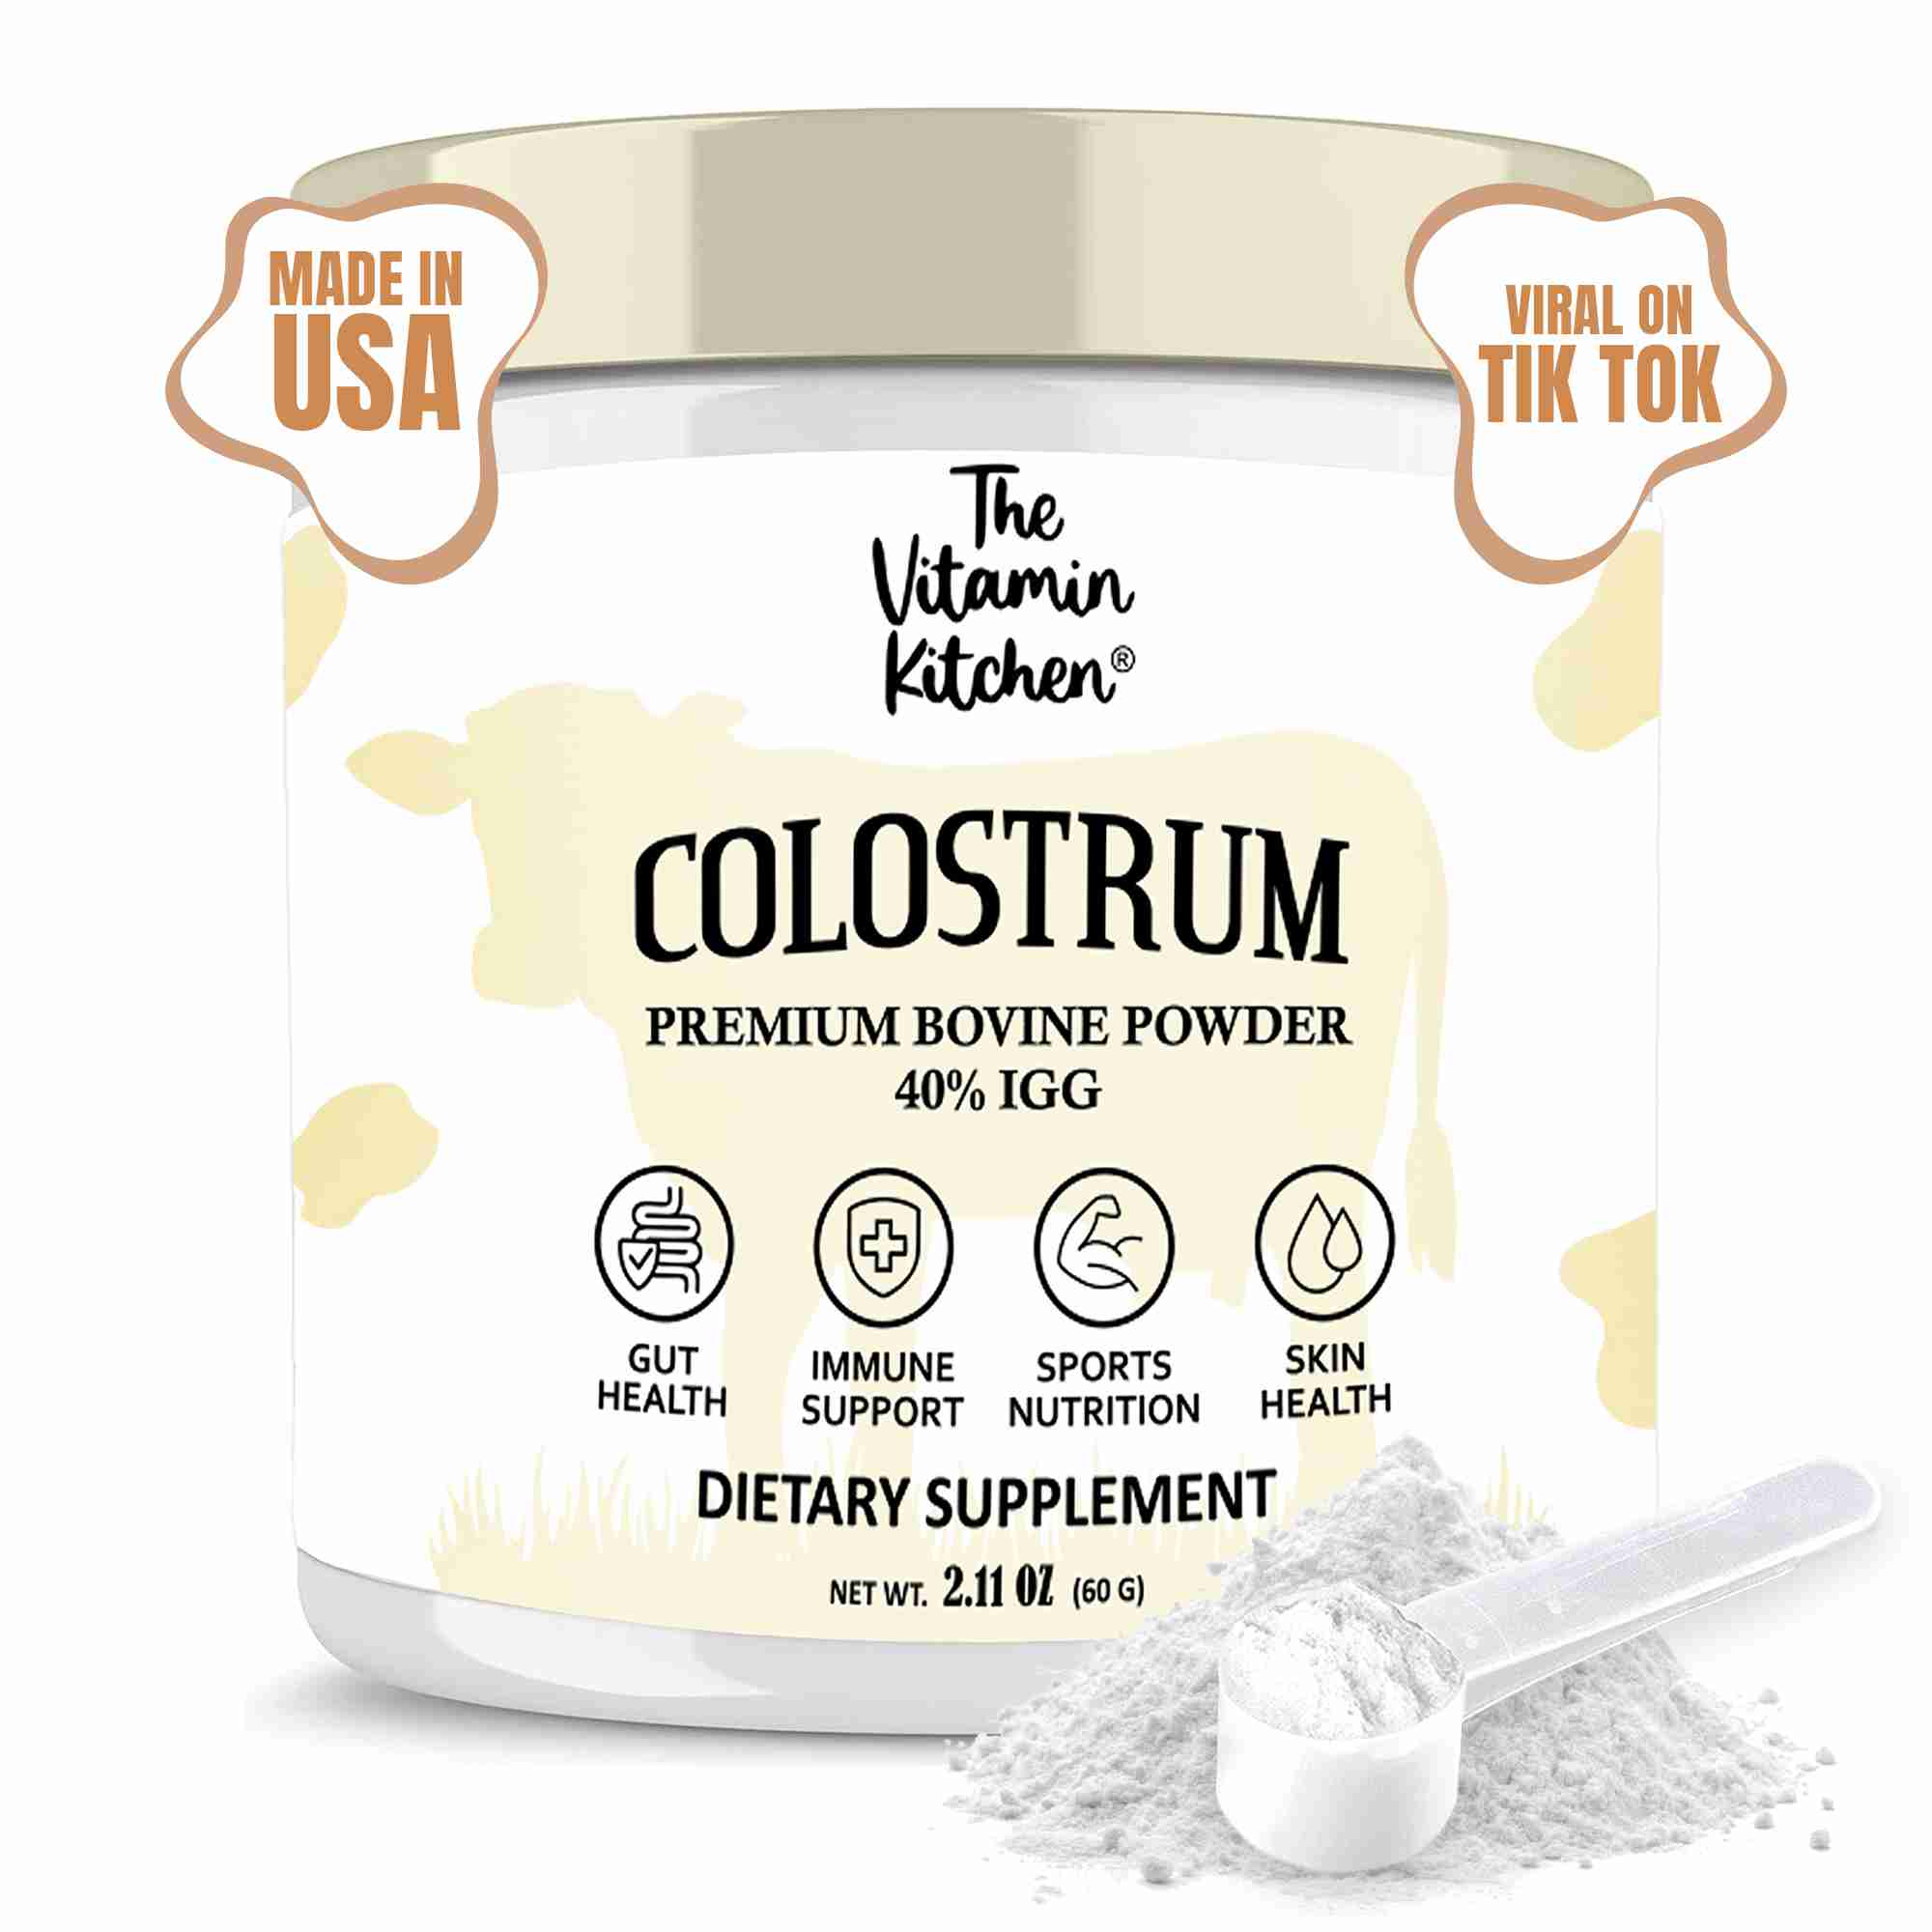 colostrum with cash back rebate